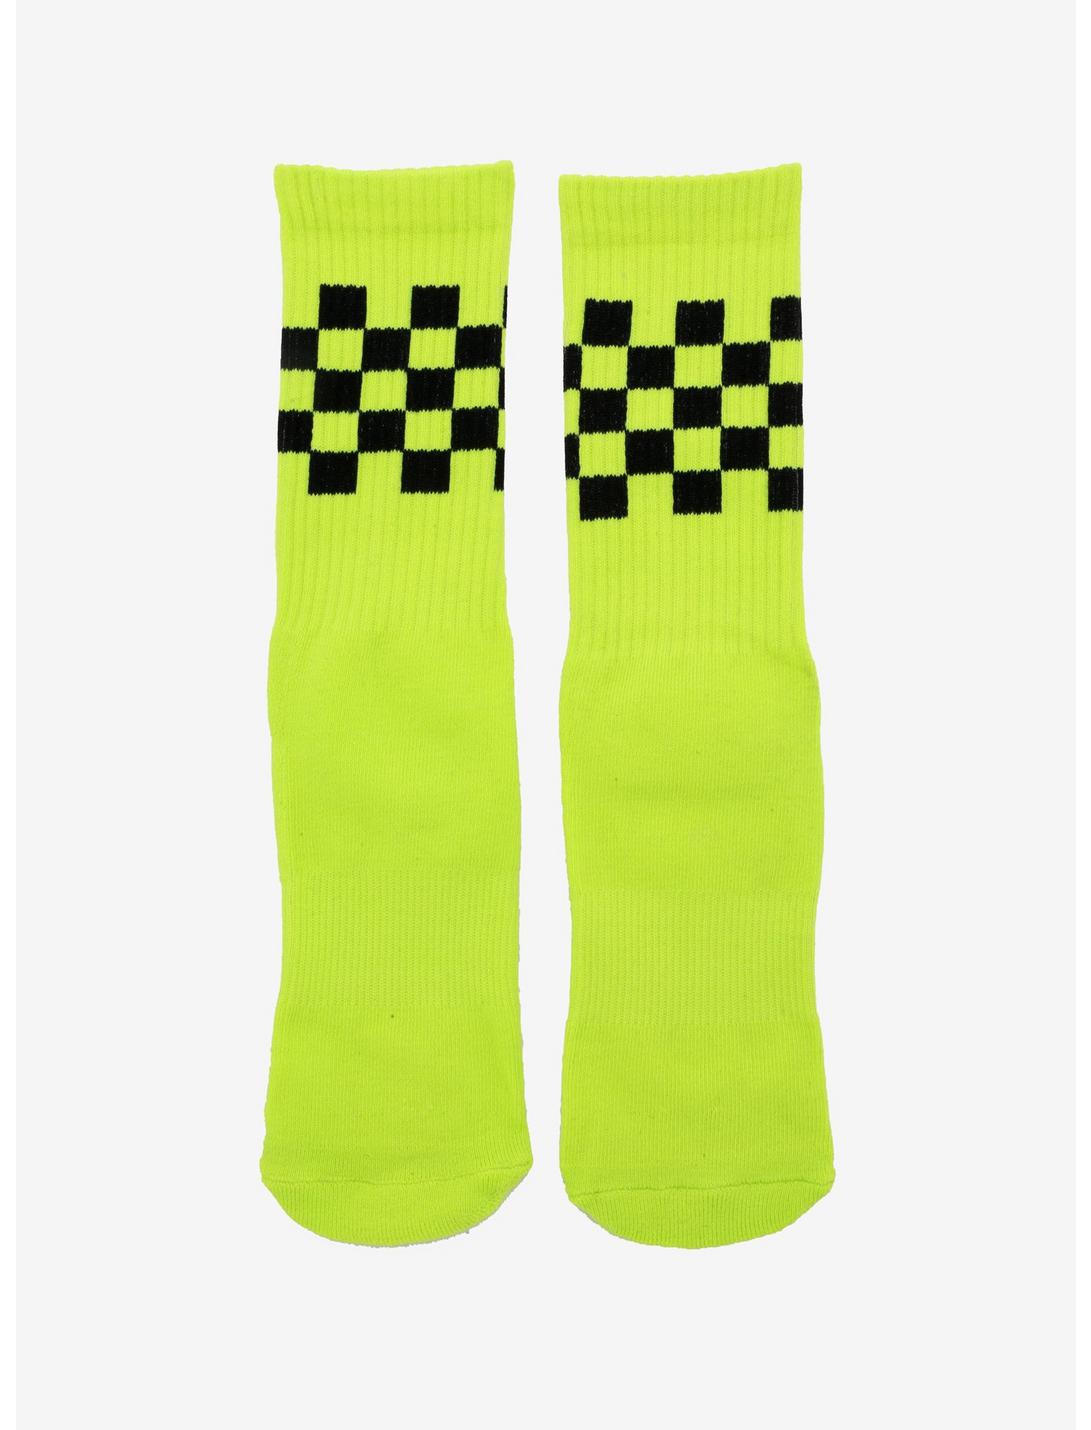 Neon Green With Black Checkered Crew Socks, , hi-res